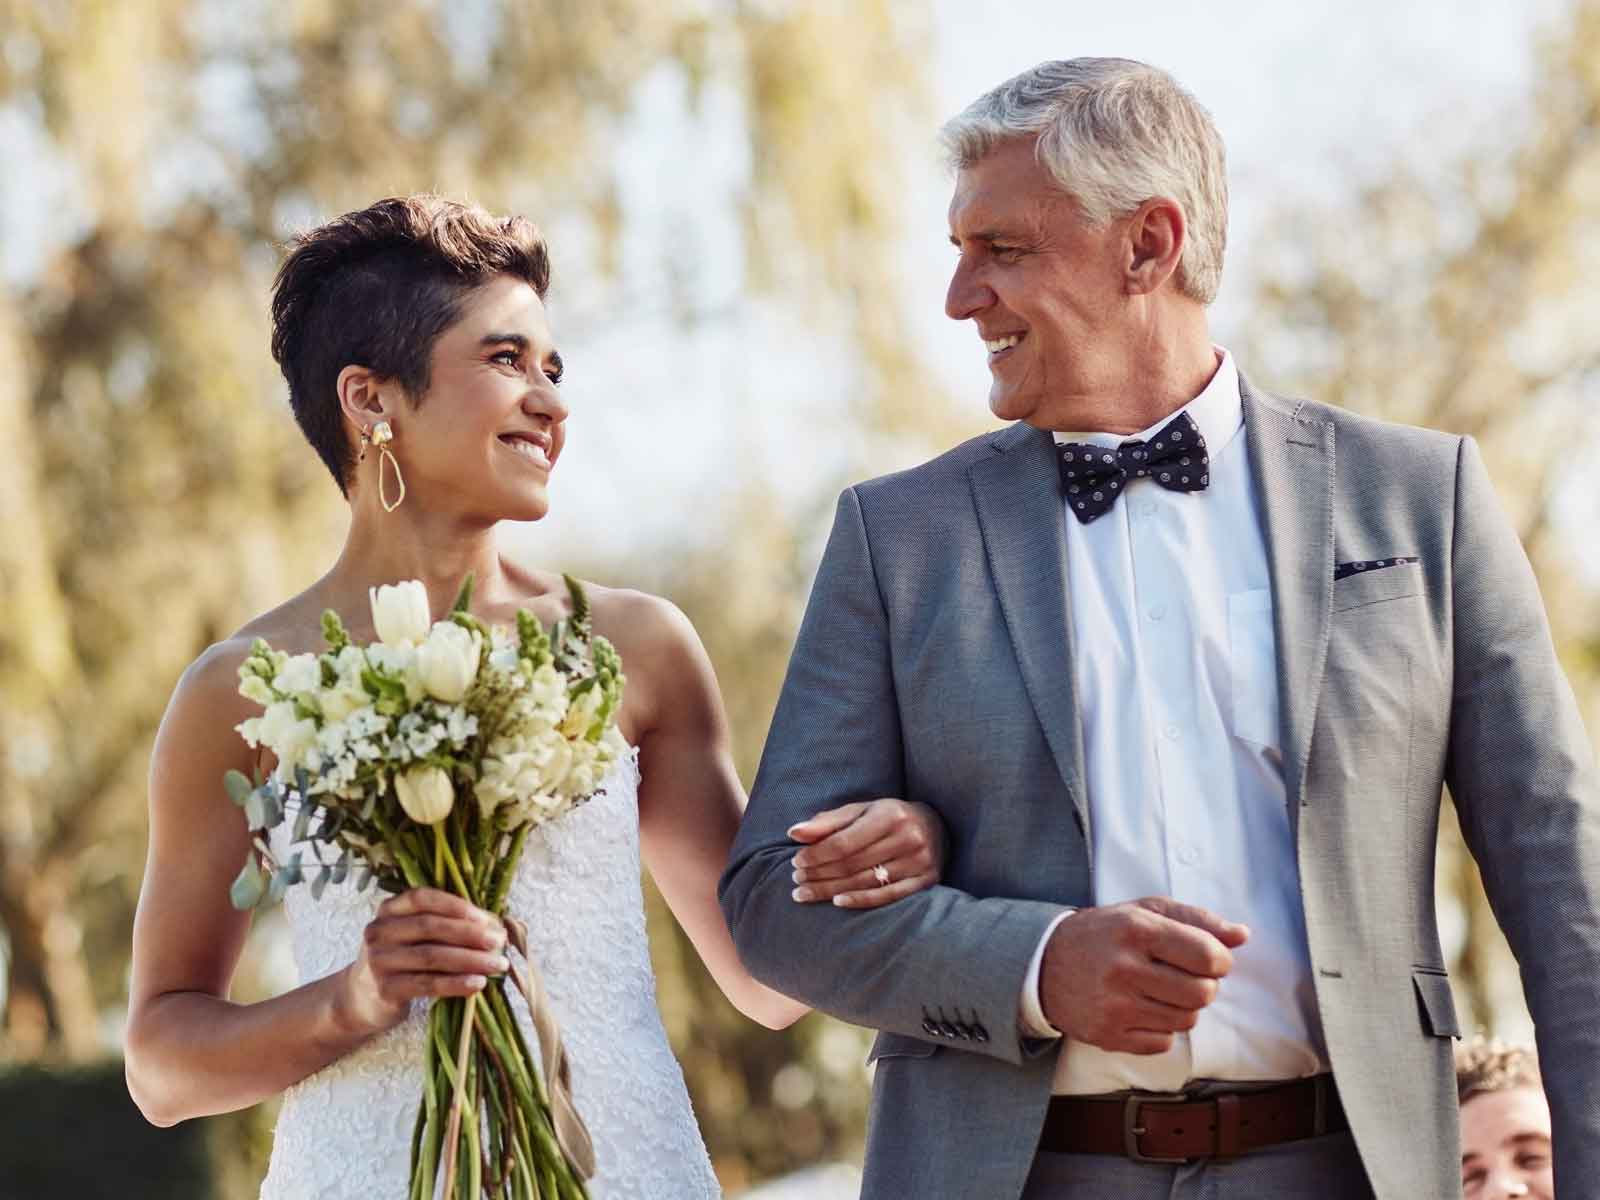 Father walking daughter down wedding aisle